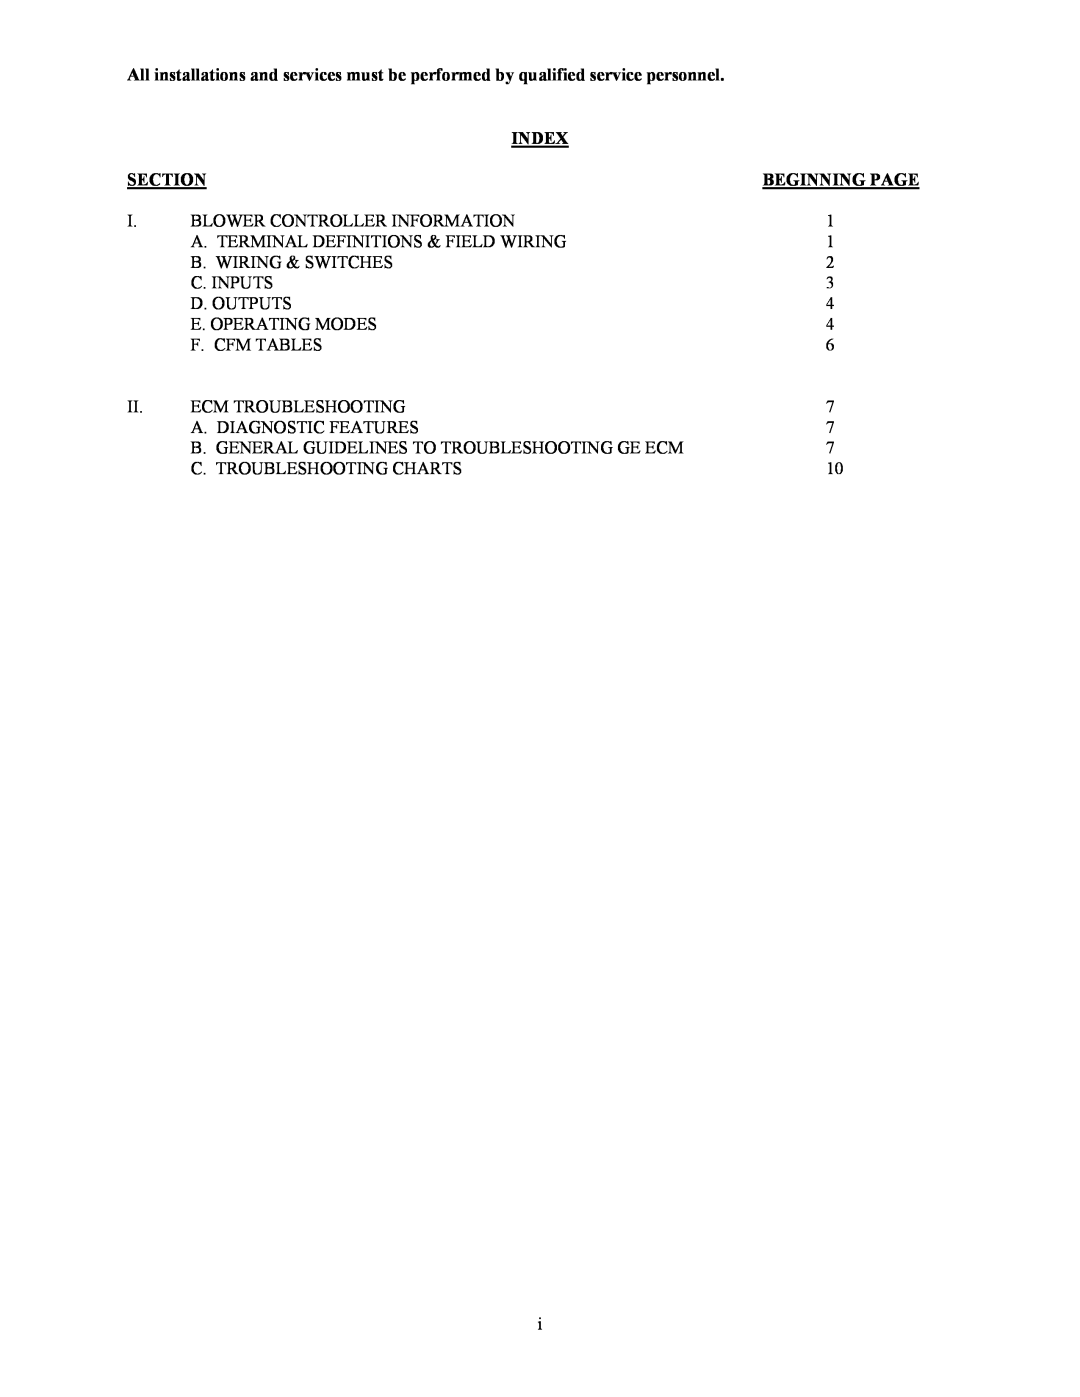 Crown CSHB60-90XE operation manual Index, Section, Beginning Page 